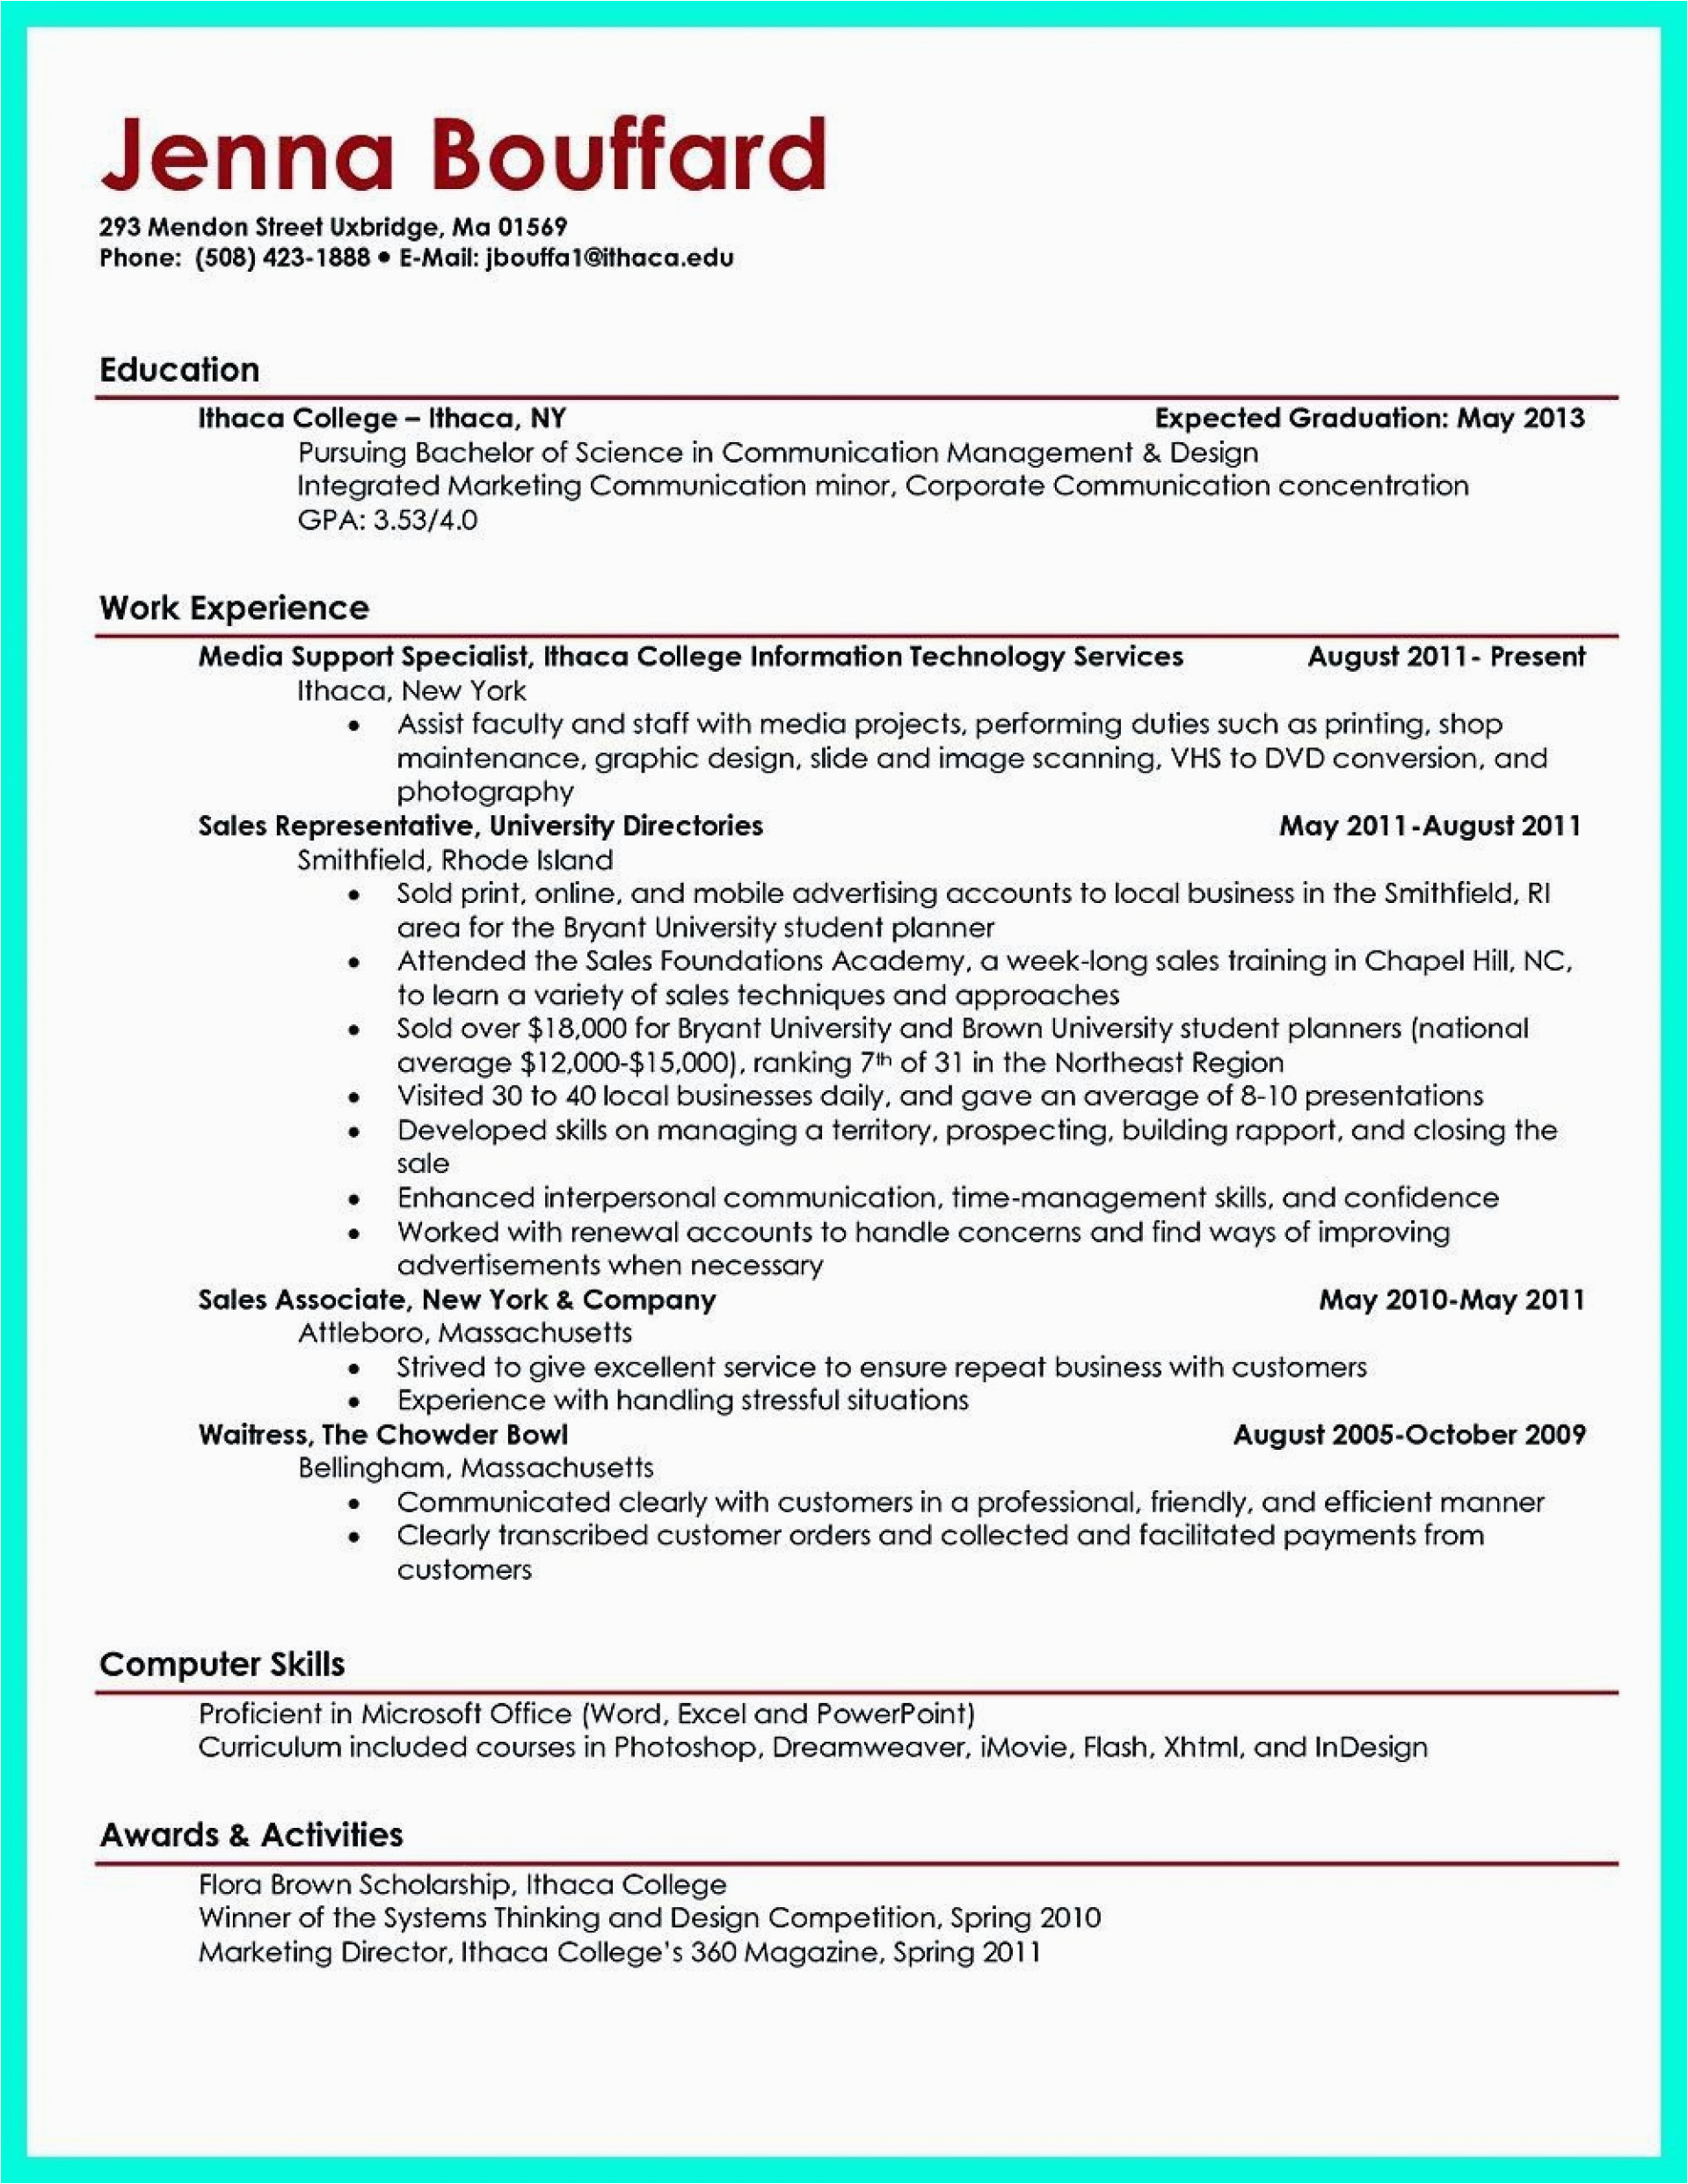 Resume Samples for College Students Application Addictionary